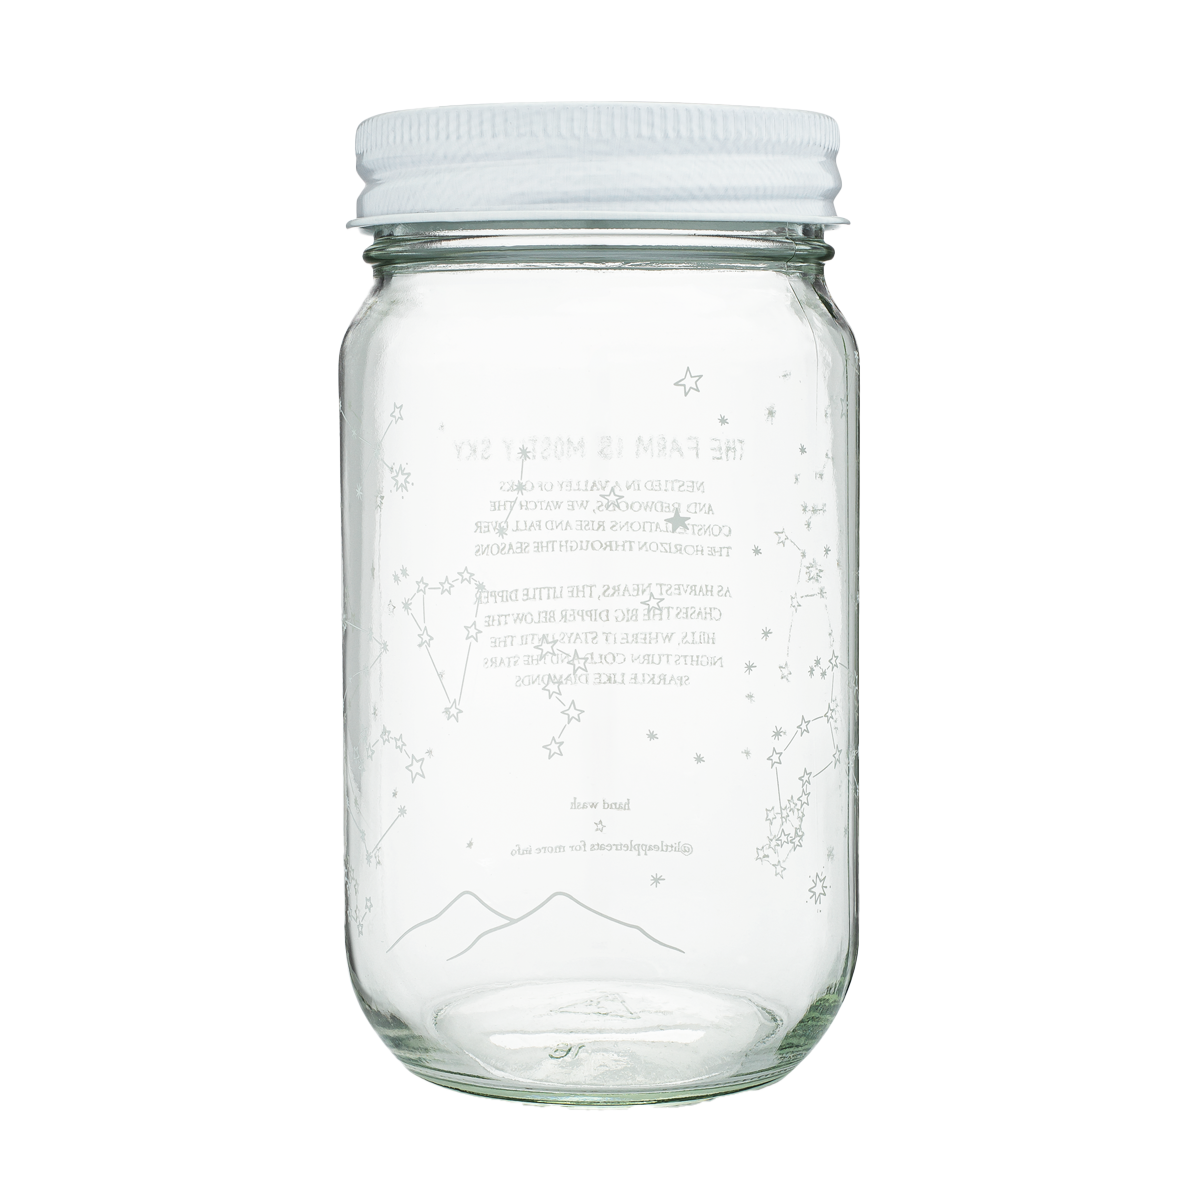 Limited Edition Cocktail Jars: The Farm Is Mostly Sky- Little Apple Treats